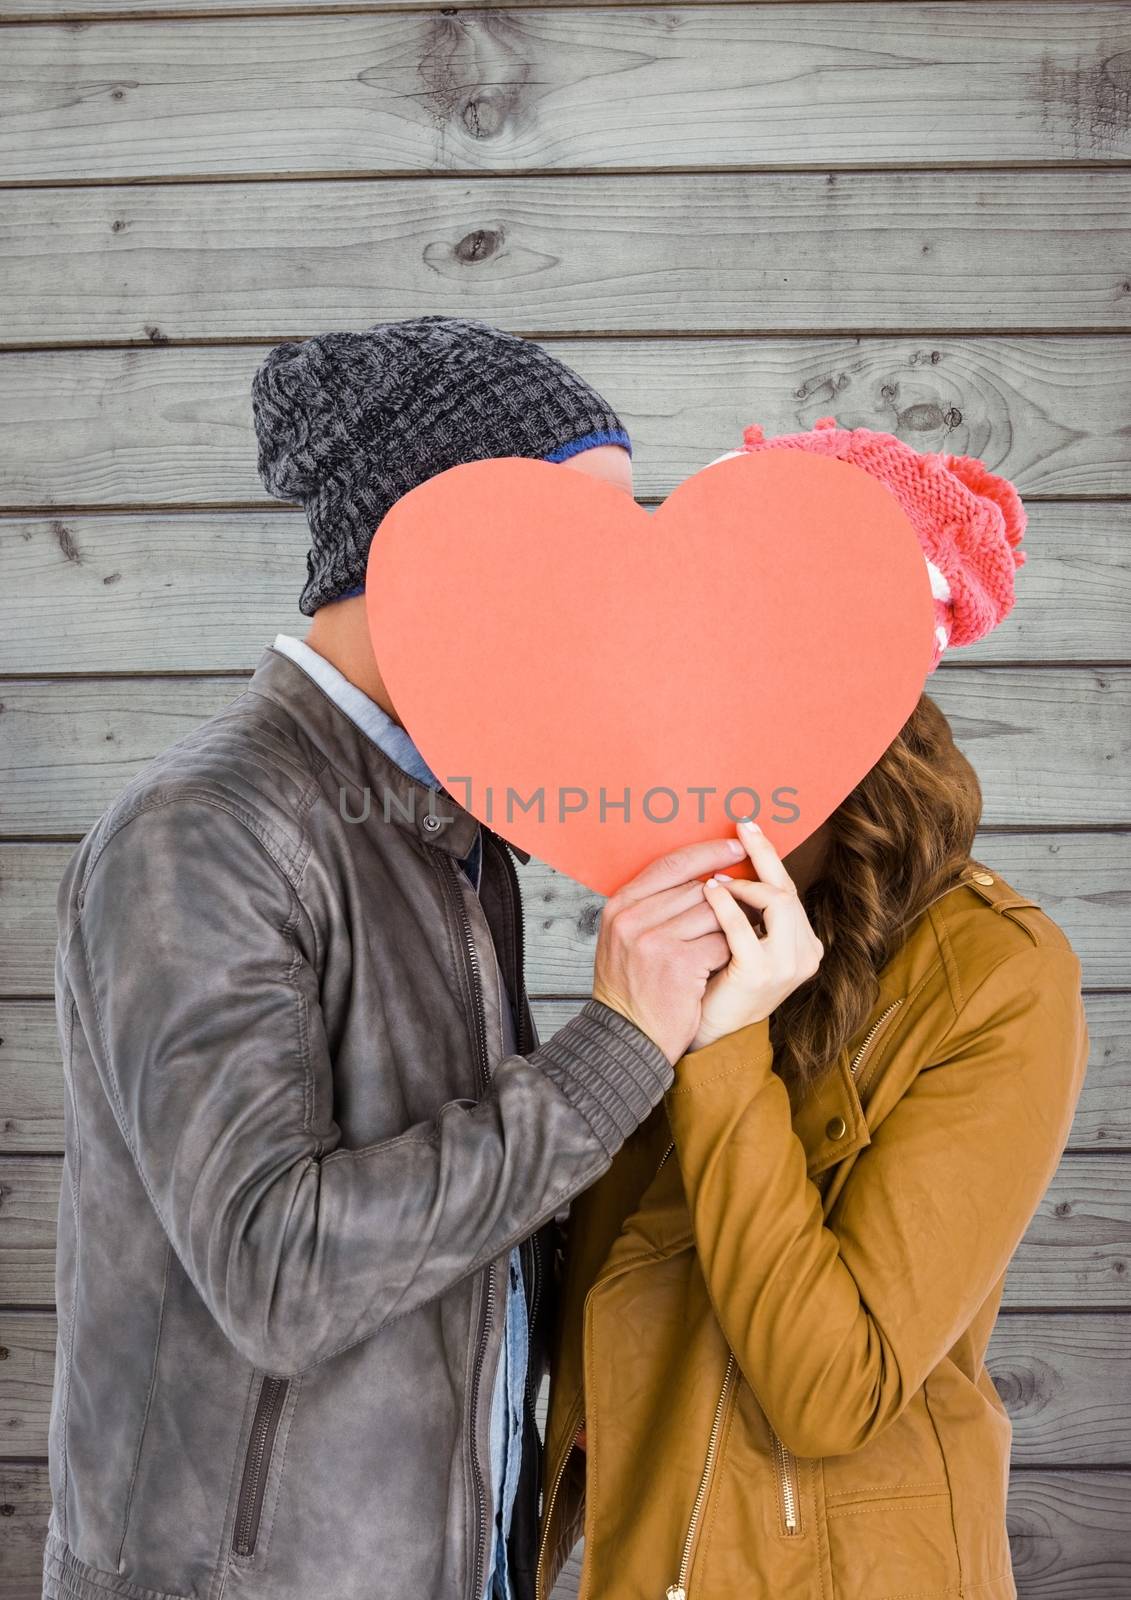 Romantic couple holding heart shape and kissing each other against wooden background